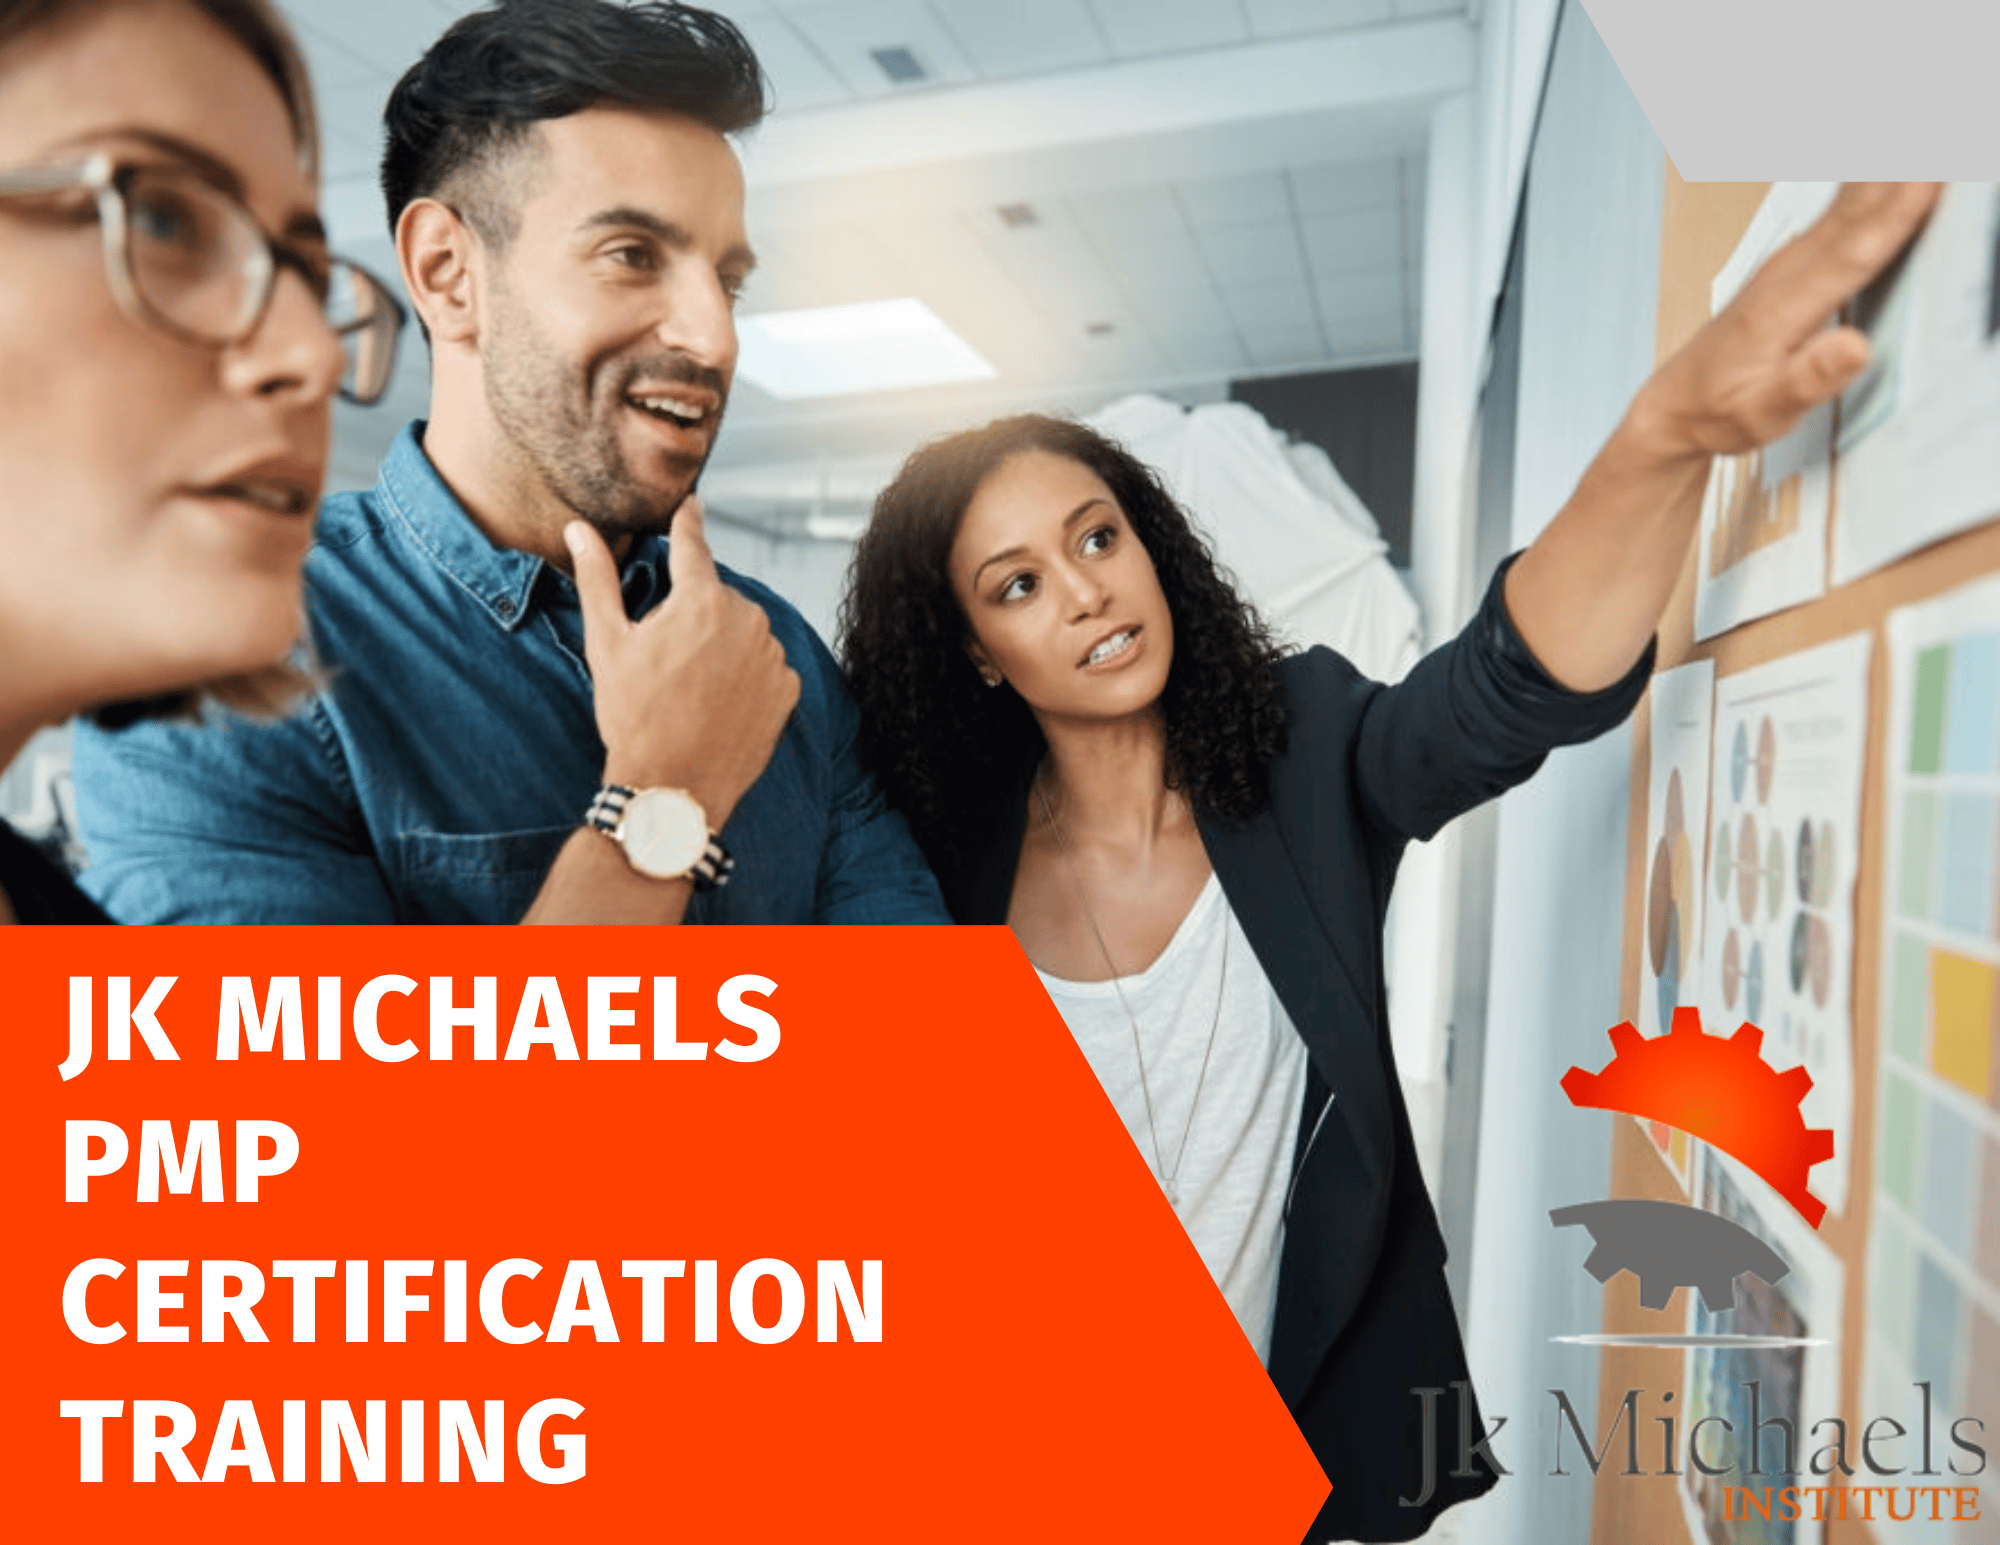 PMP-CERTIFICATION-TRAINING